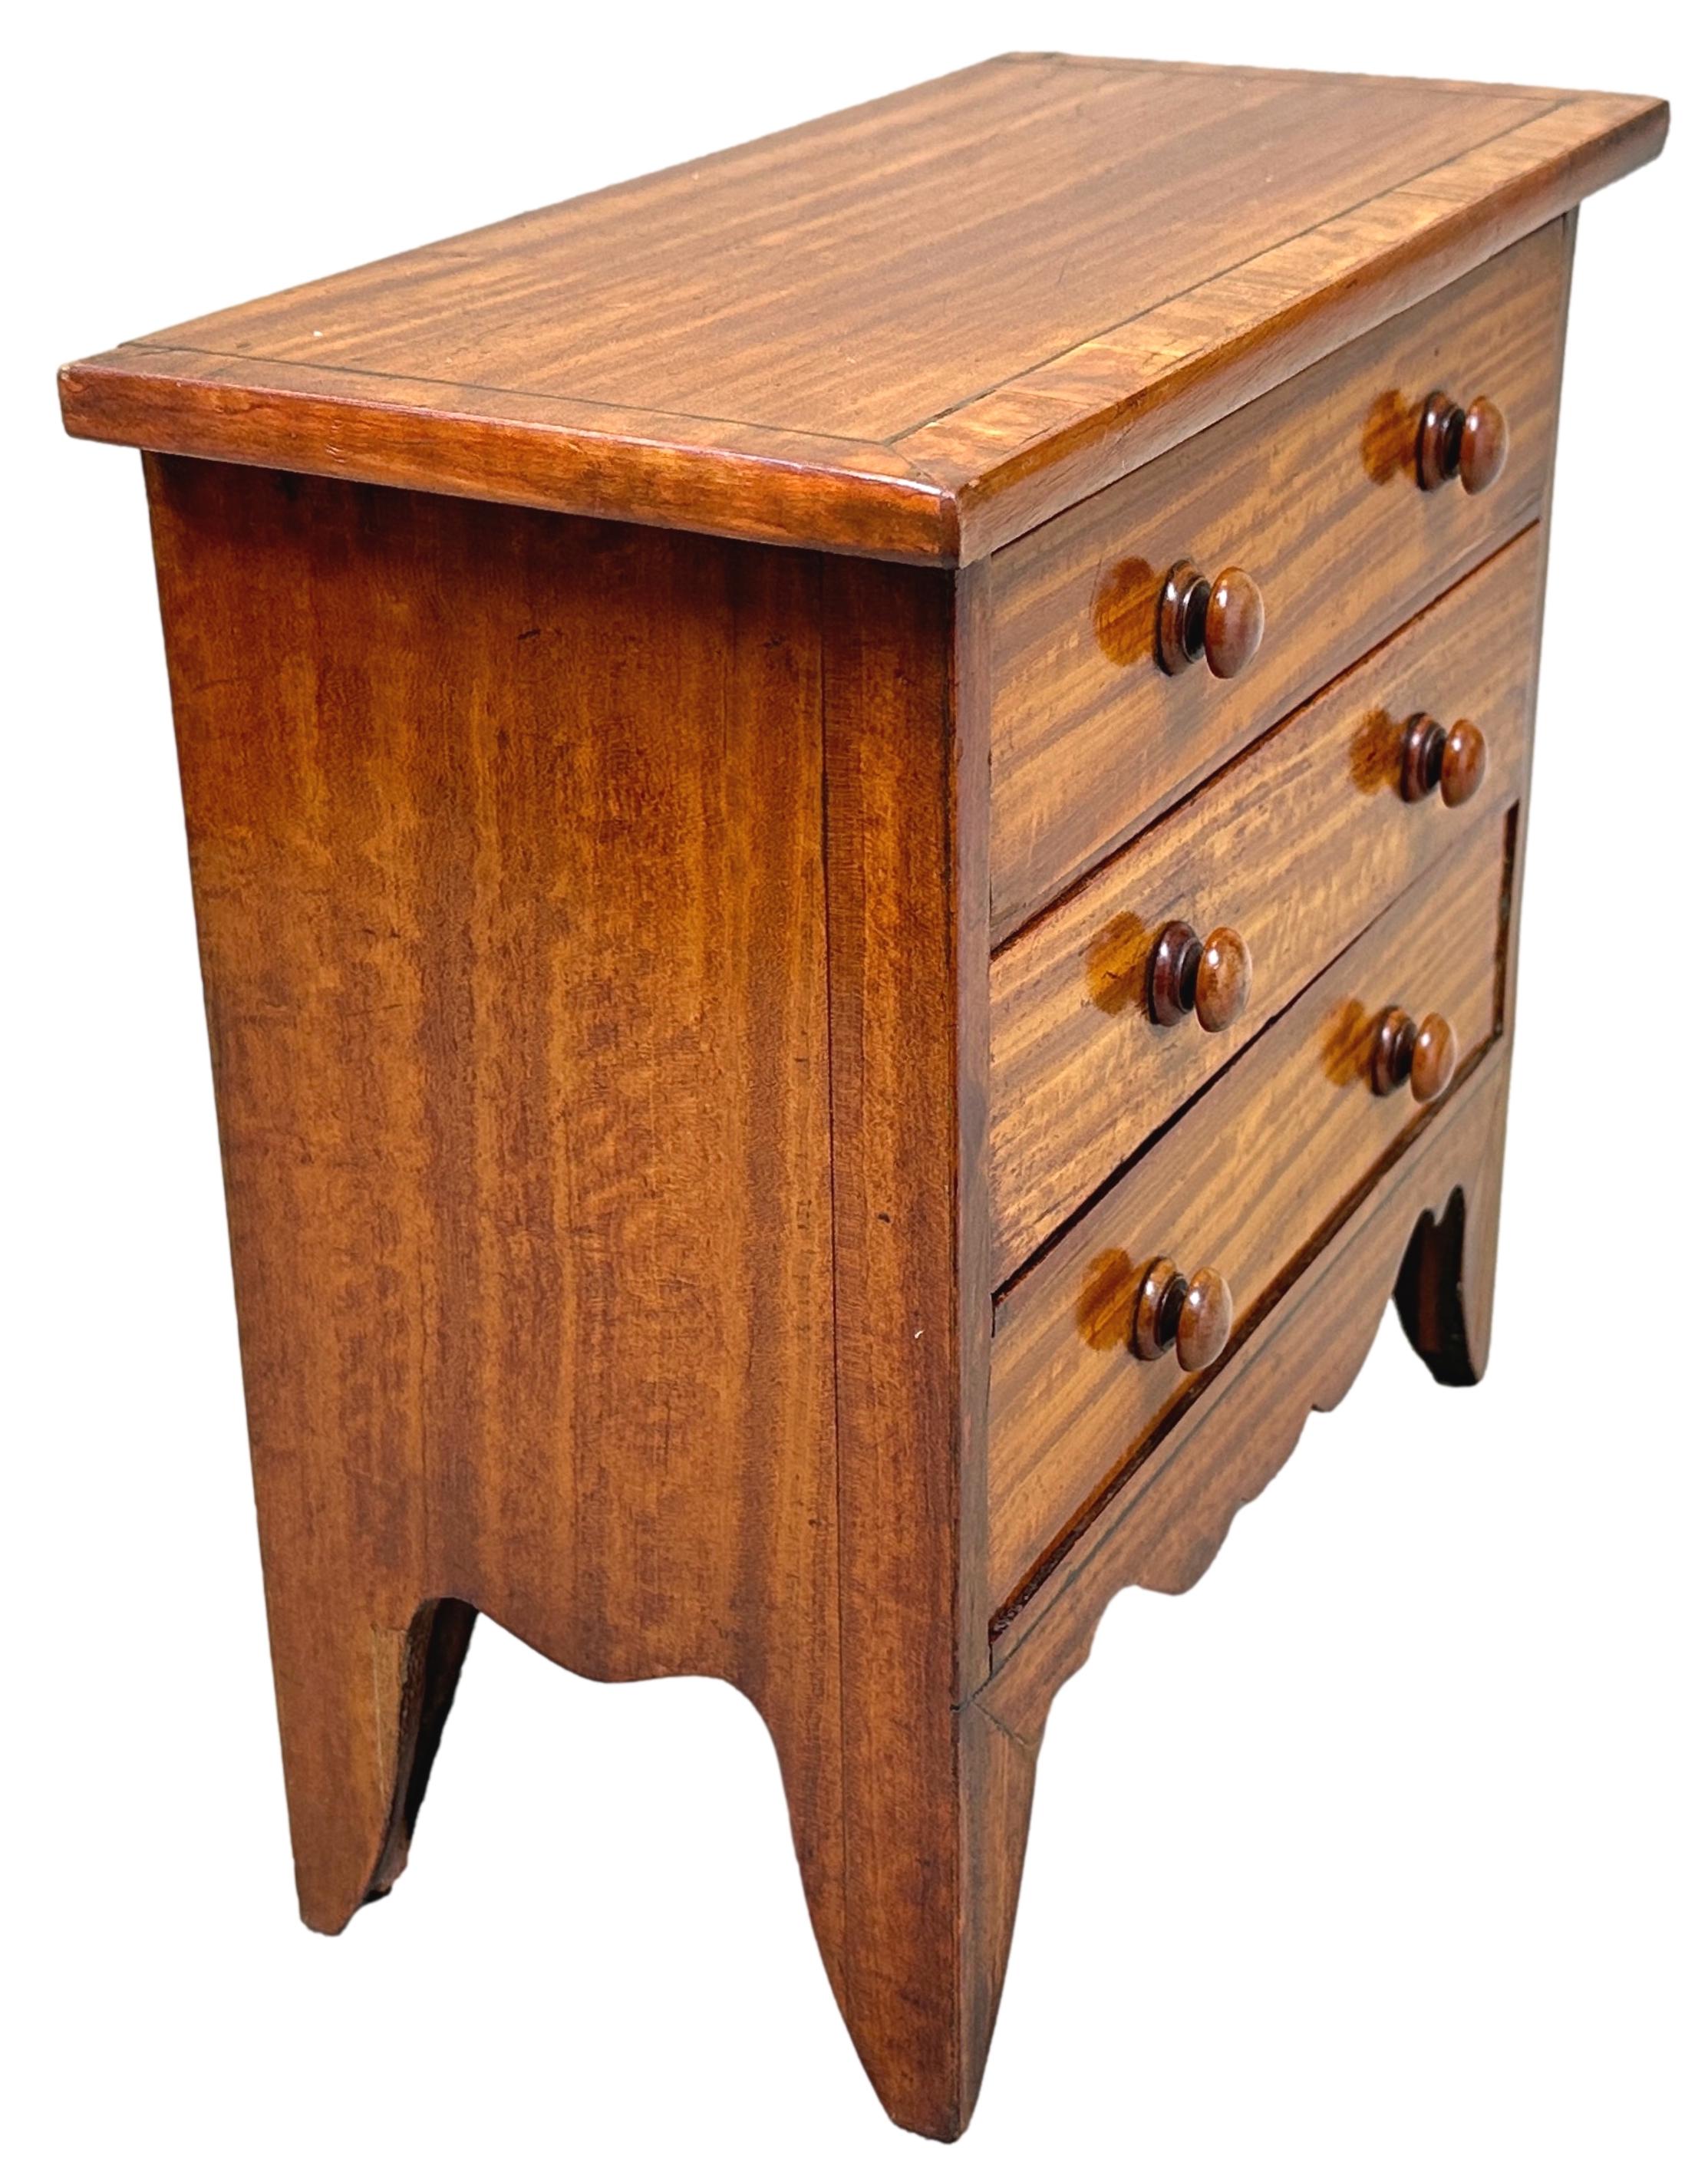 A good quality late Regency Period, 19th century, satinwood miniature chest of attractive small proportions having well figured and crossbanded top, over three drawers with original turned wooden knobs, raised on elegant original splayed feet with